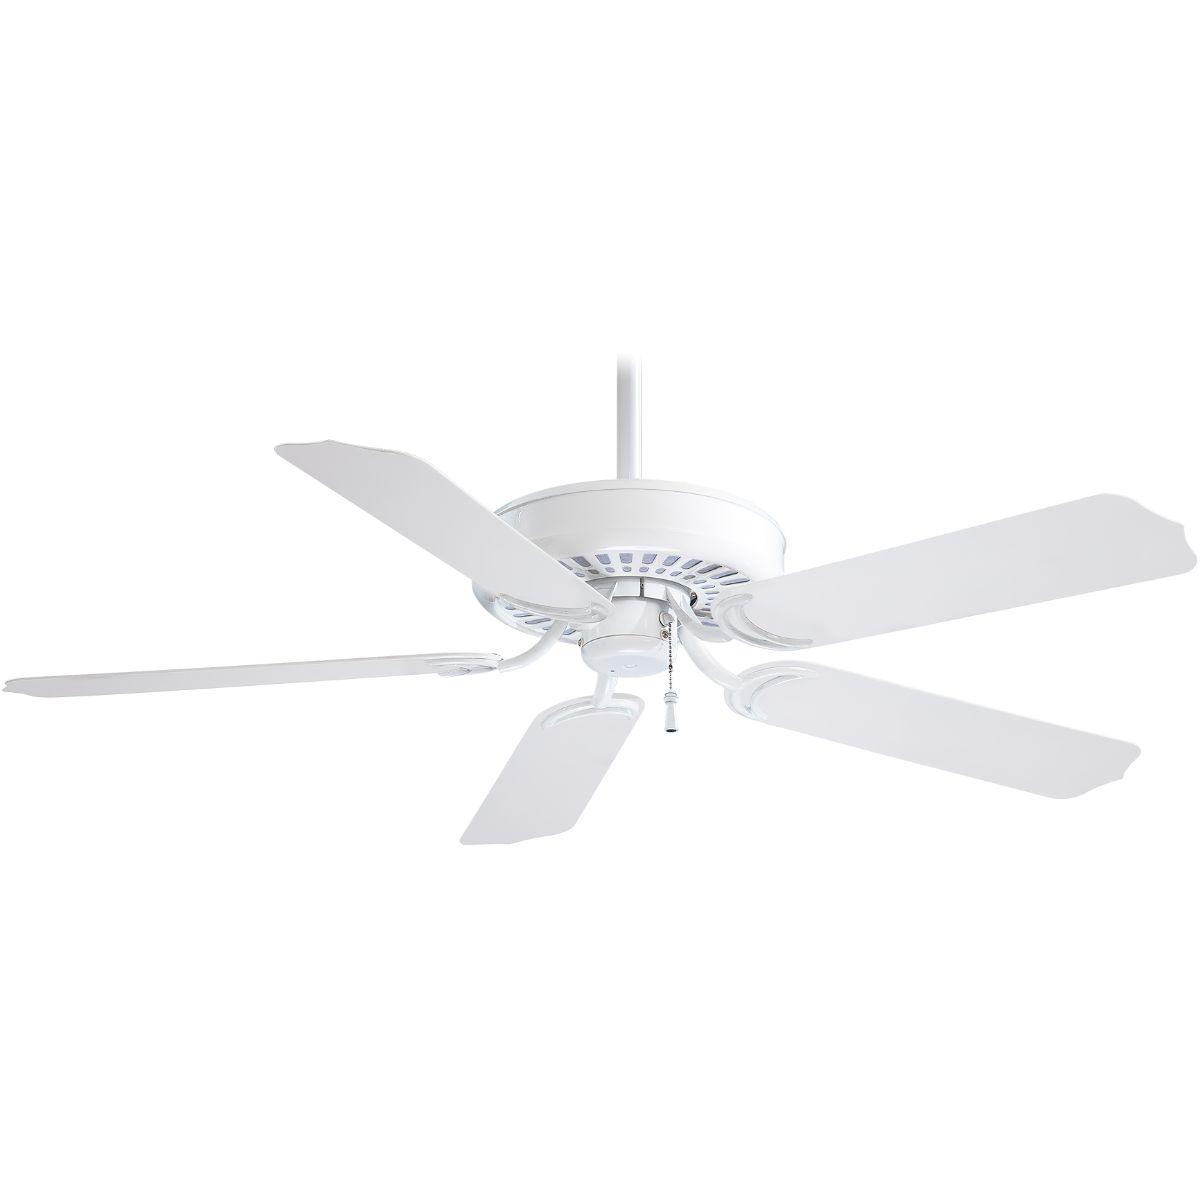 Sundance 52 Inch Outdoor Ceiling Fan With Pull Chain